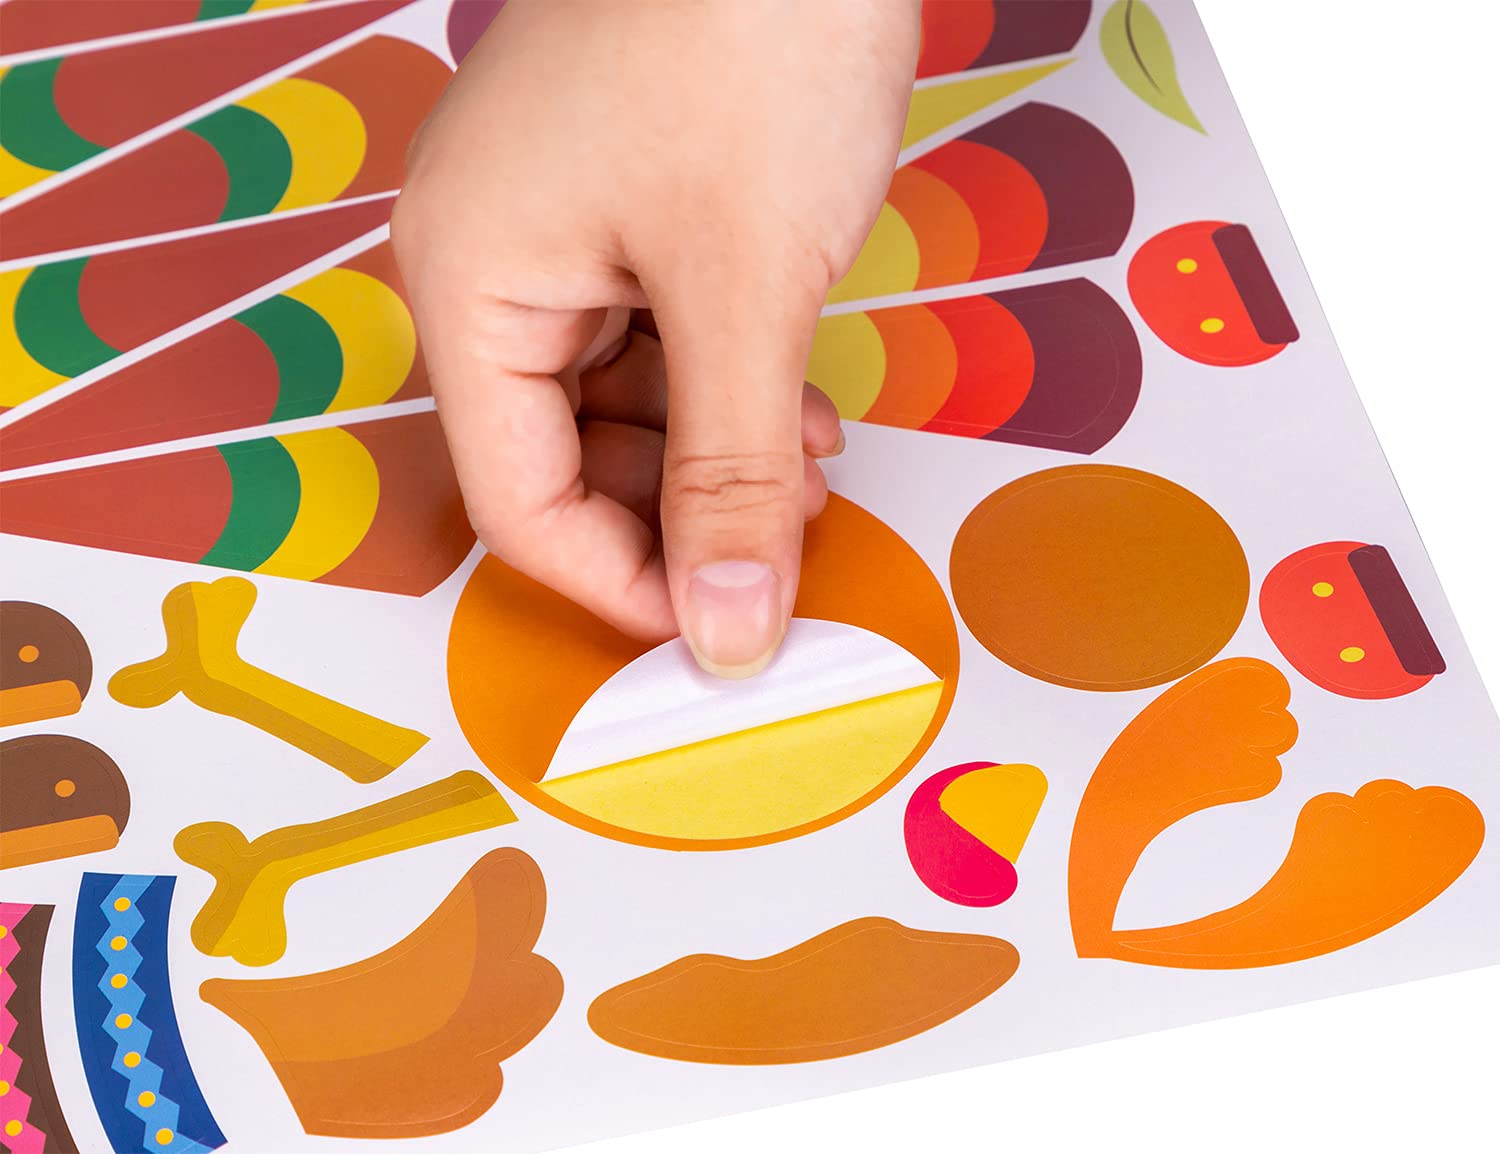 52pcs Thanksgiving Crafts for Kids, Make-A-Turkey Stickers Party Games/Favors/Supplies(Small Size)